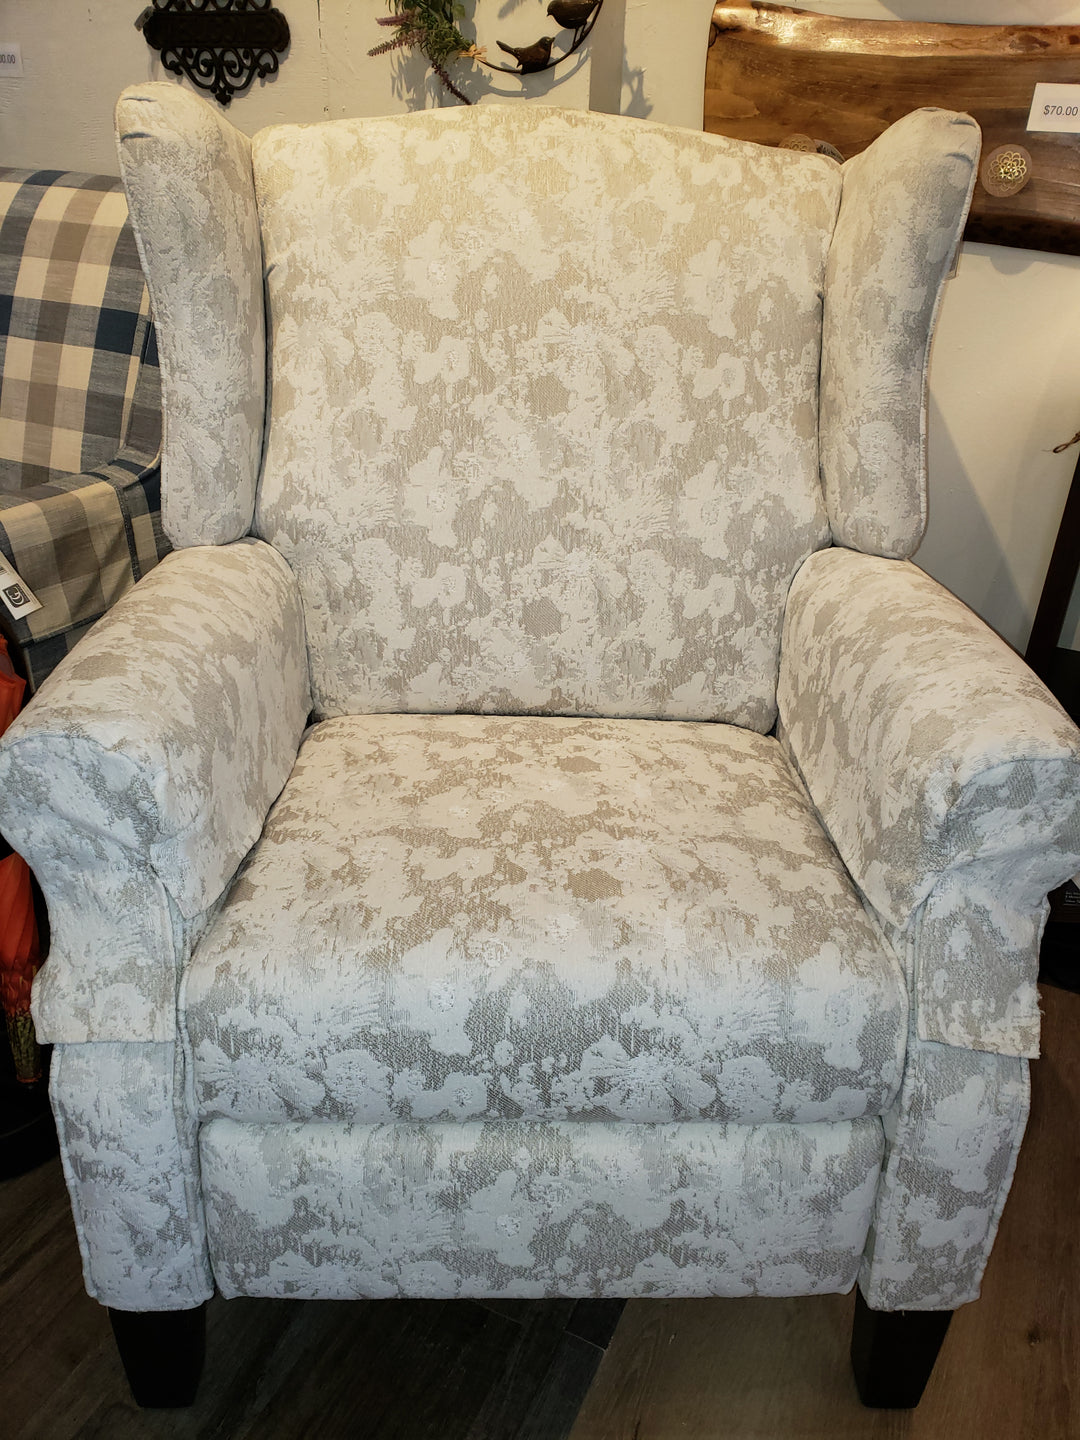 32-66 MANUAL RECLINER CHAIR - SUPERSTYLE